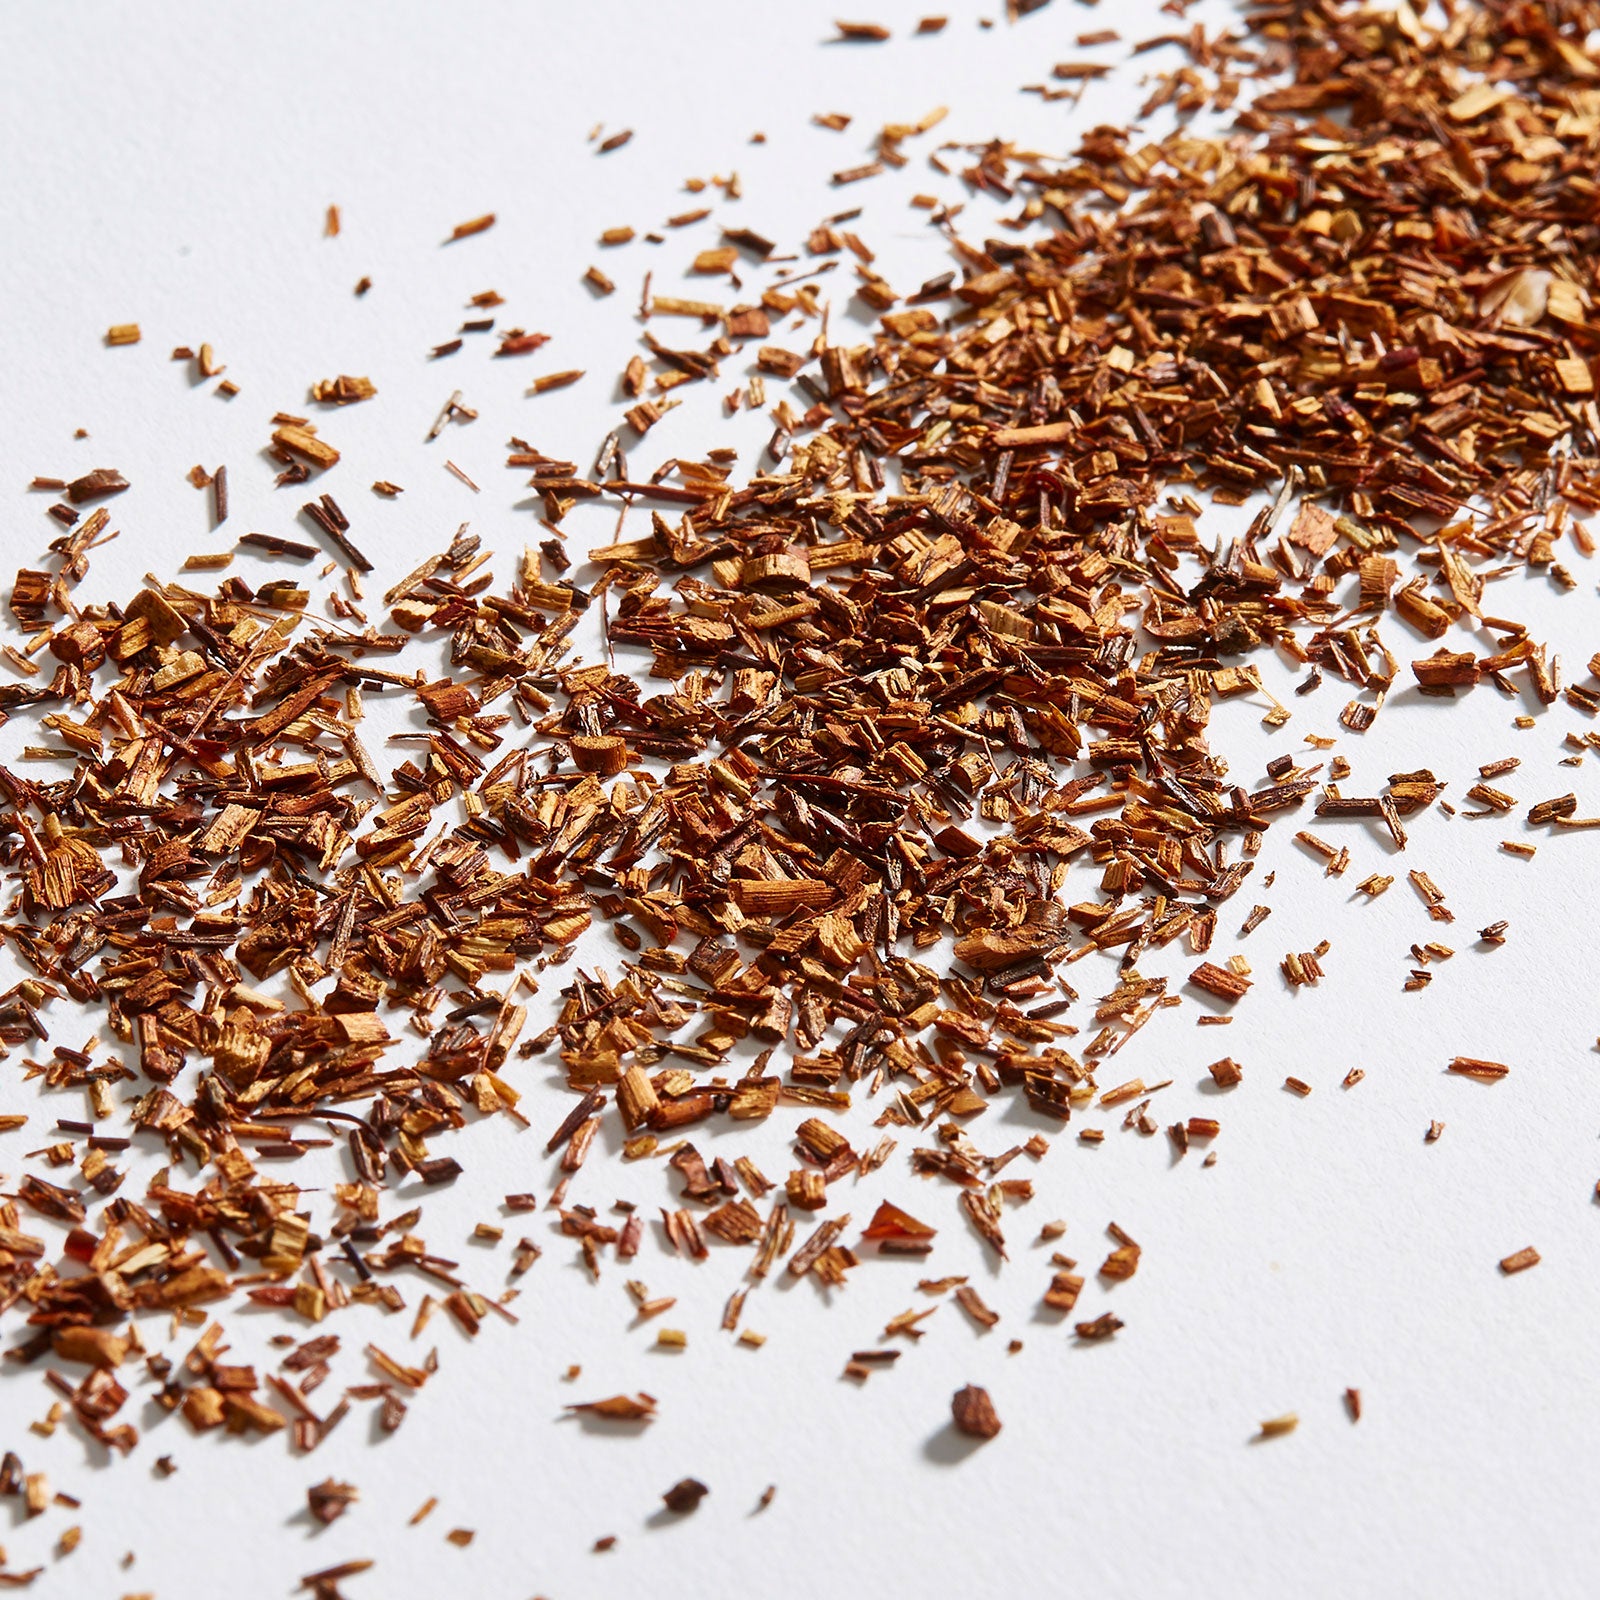 Cape-Colony-Rooibos-Loose-Leaf-Herbal-Infusion-_1.jpg__PID:9e6a8564-1b1d-4bef-a435-034b6ac960c7